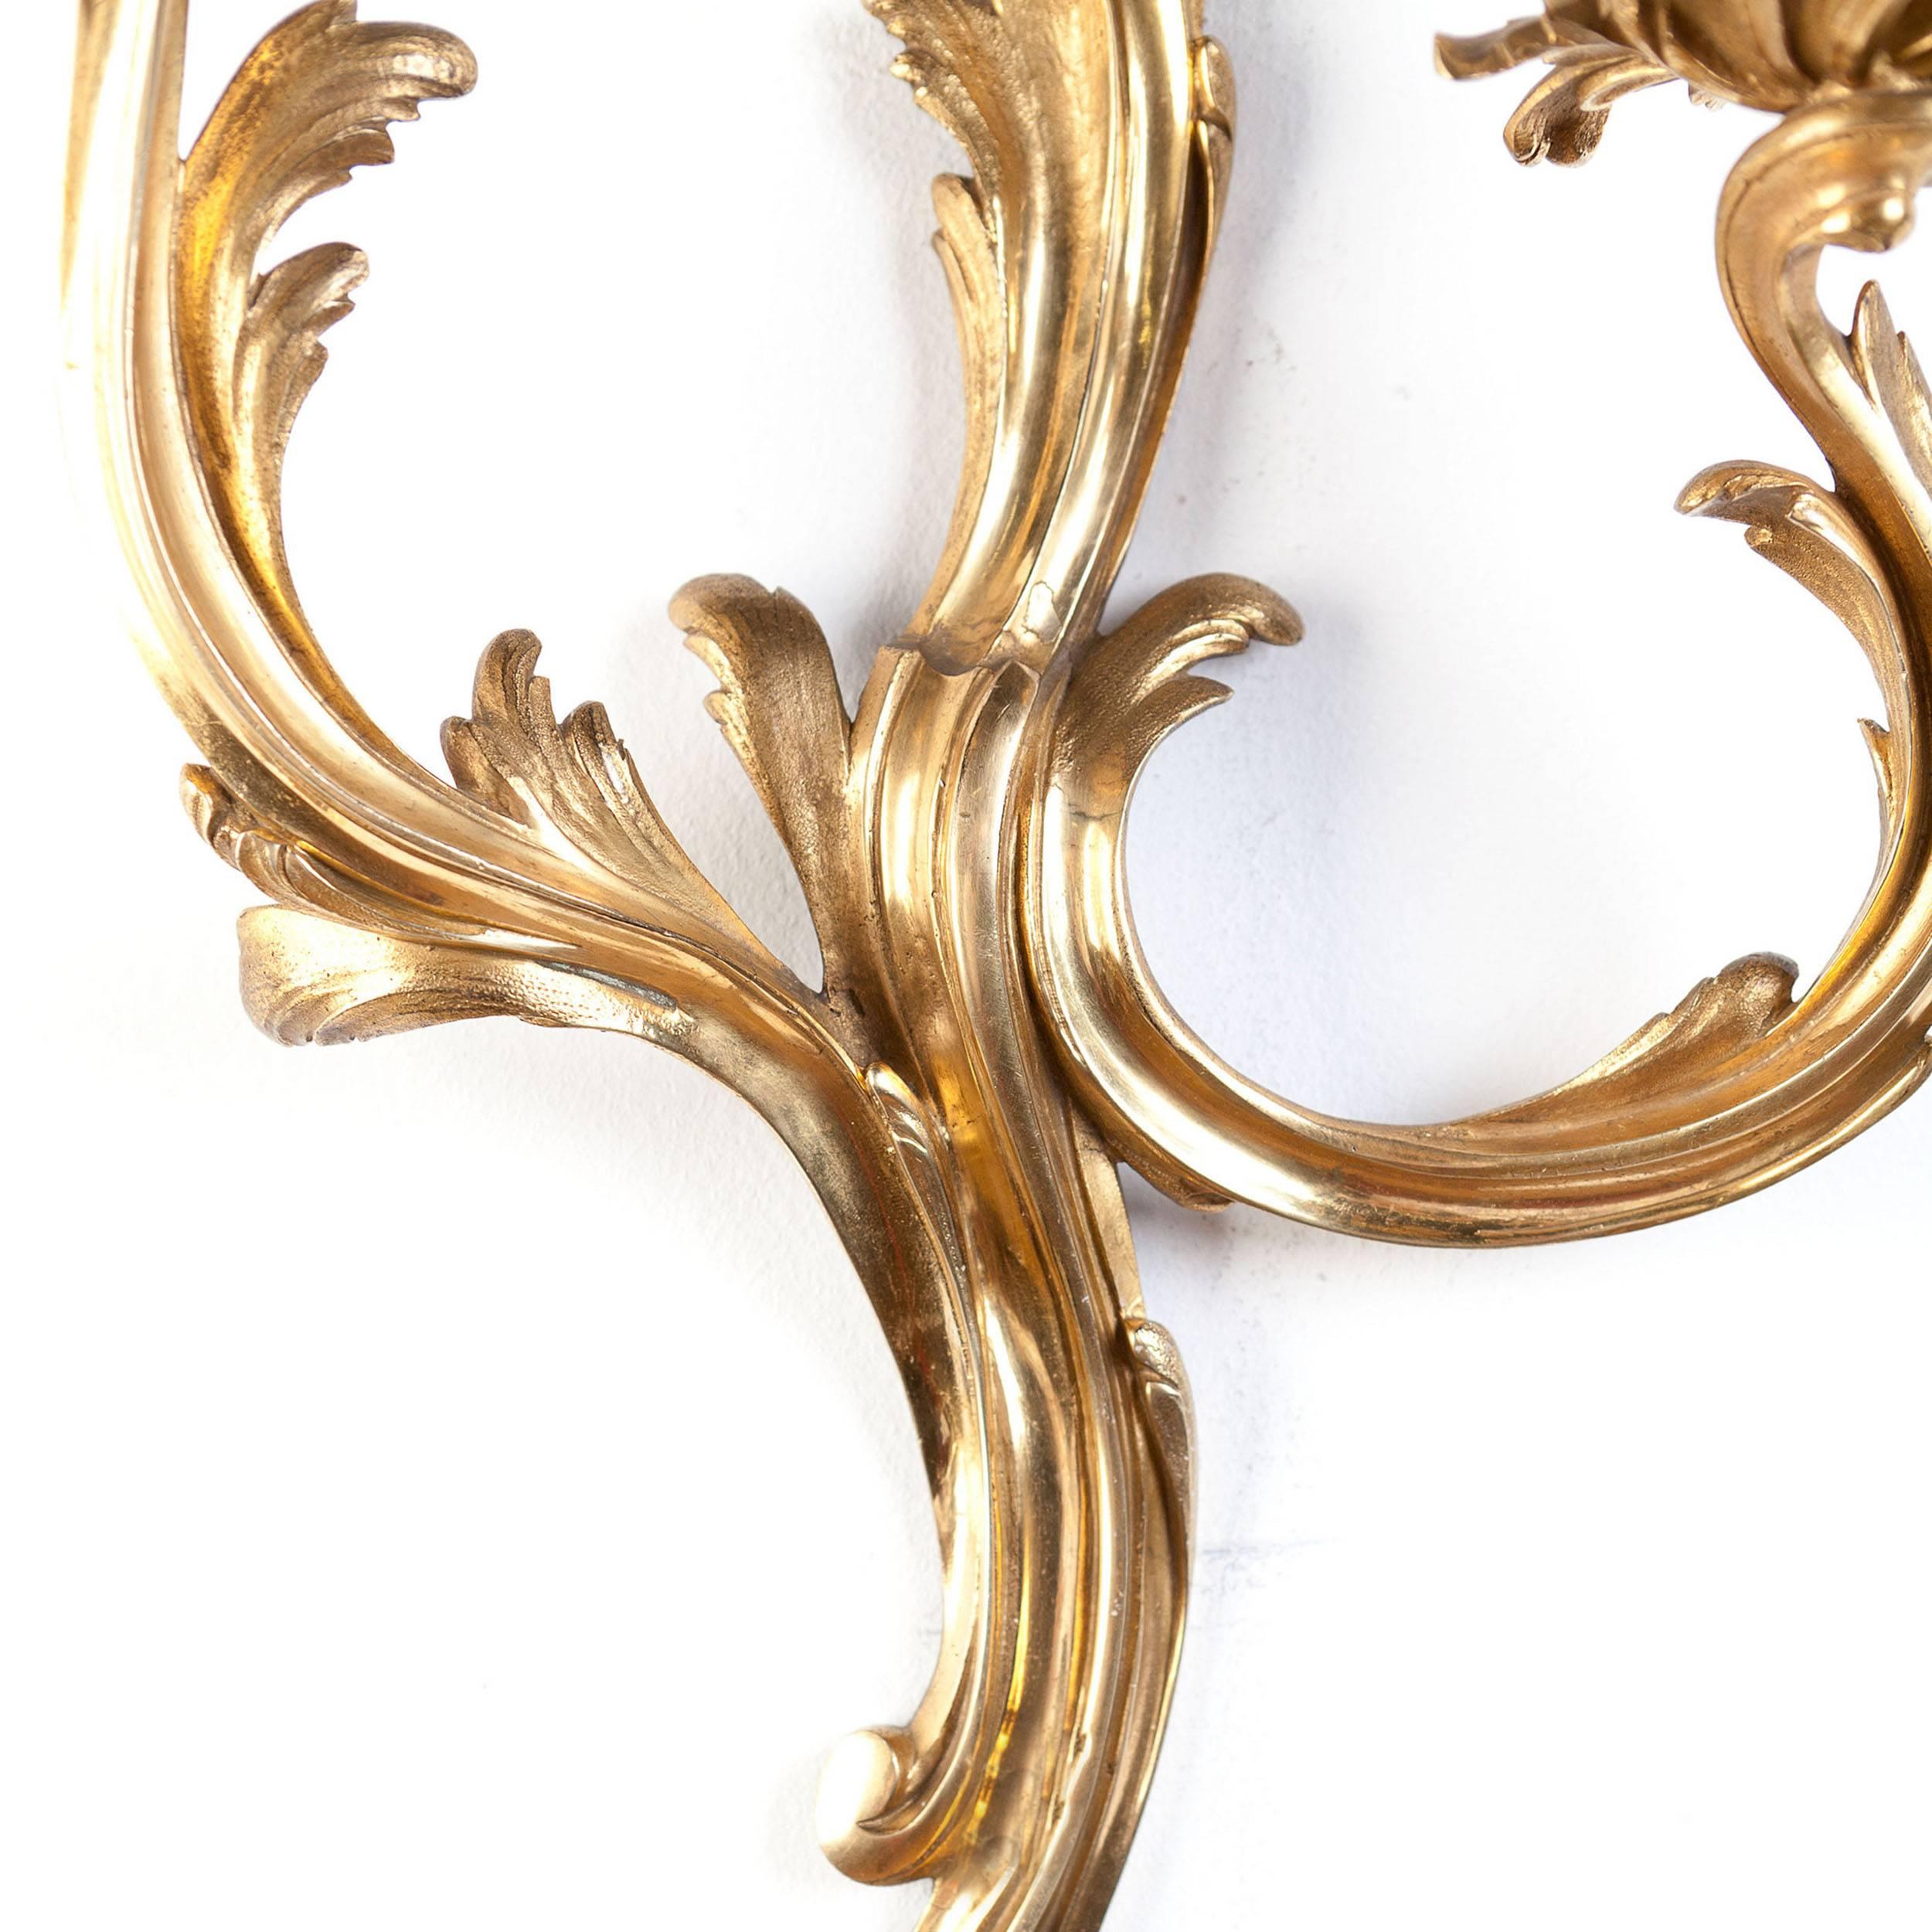 Of superb quality, this pair of rare mid-18th century Louis XV gilt ormolu wall appliqués cast in bronze with superb detailing. Each with two Rococo arms of sinuous design and of exceptional proportion. 

This design is very much in the manner of